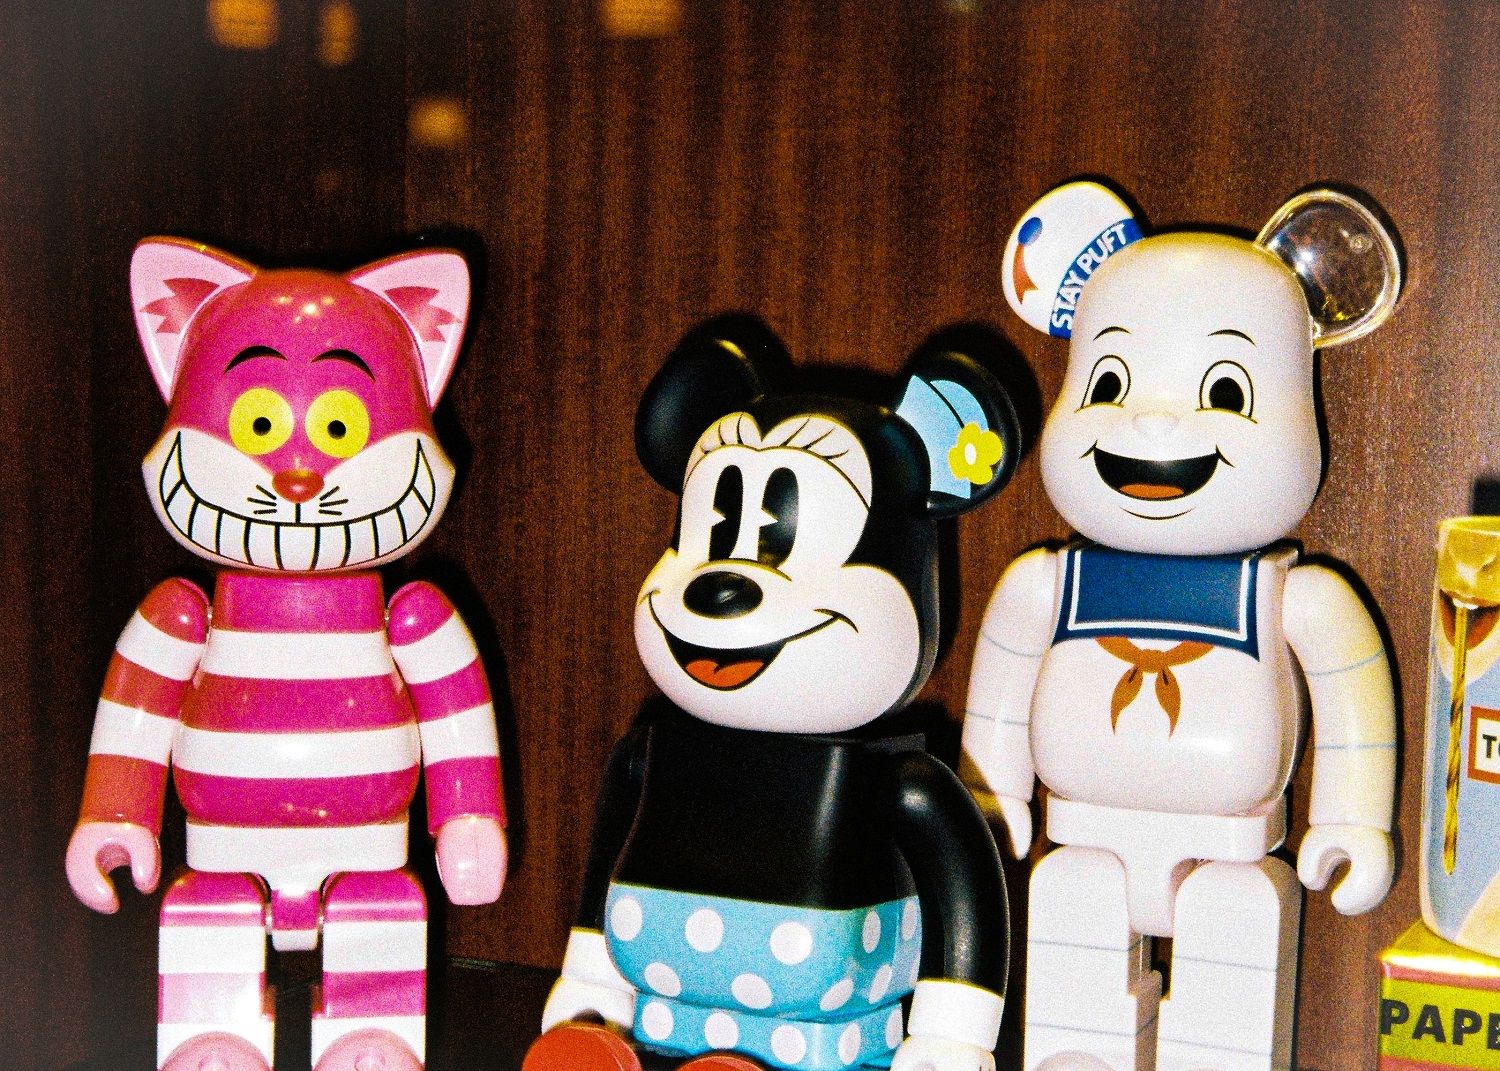 What Are the Types of Bearbrick Relseases?Your Guide to Bearbrick